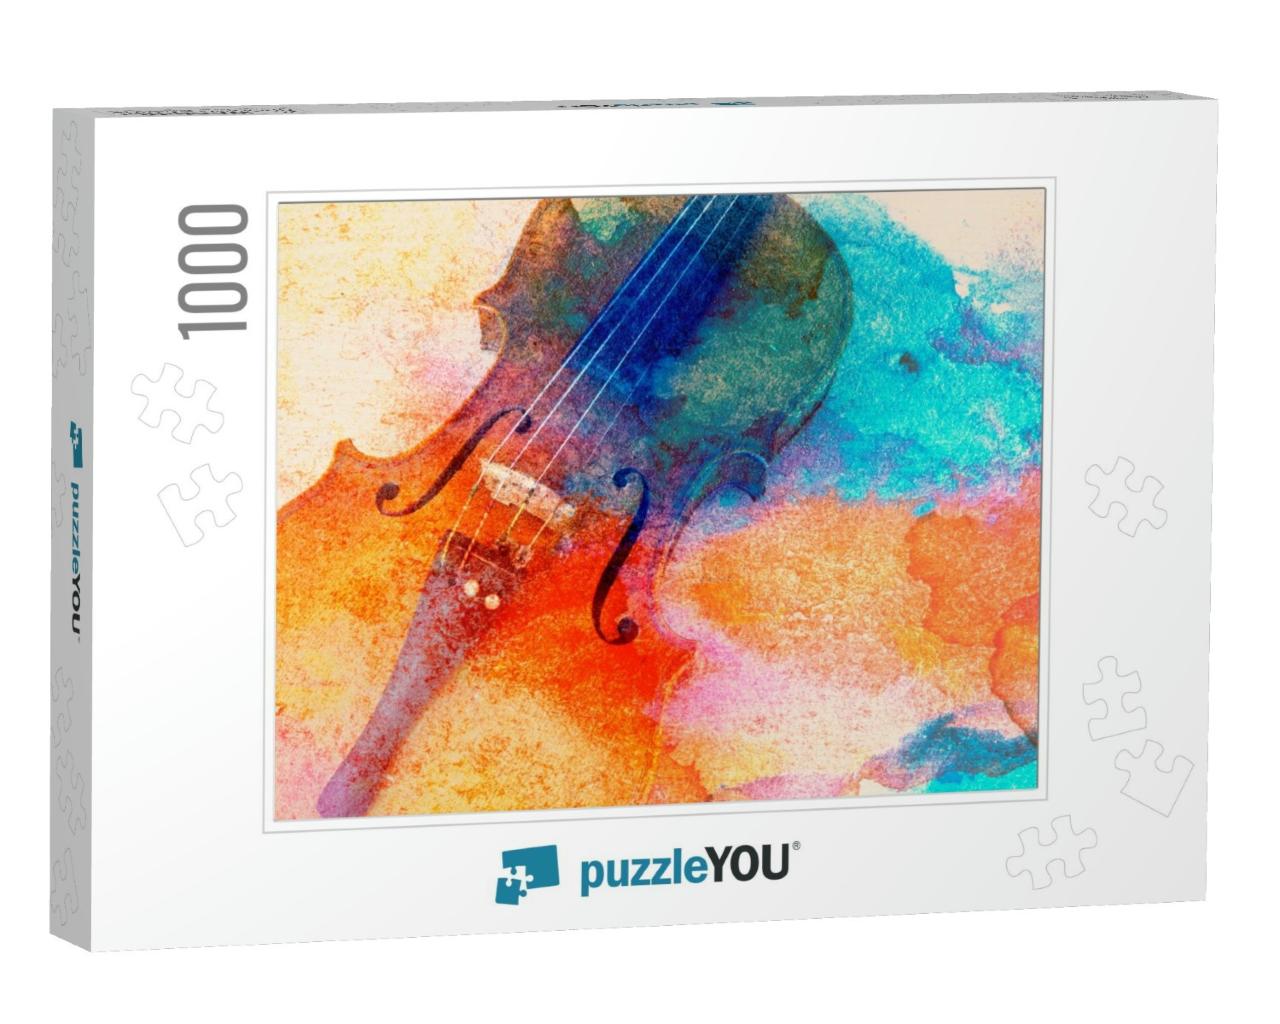 Abstract Violin Background - Violin Lying on the Table, M... Jigsaw Puzzle with 1000 pieces